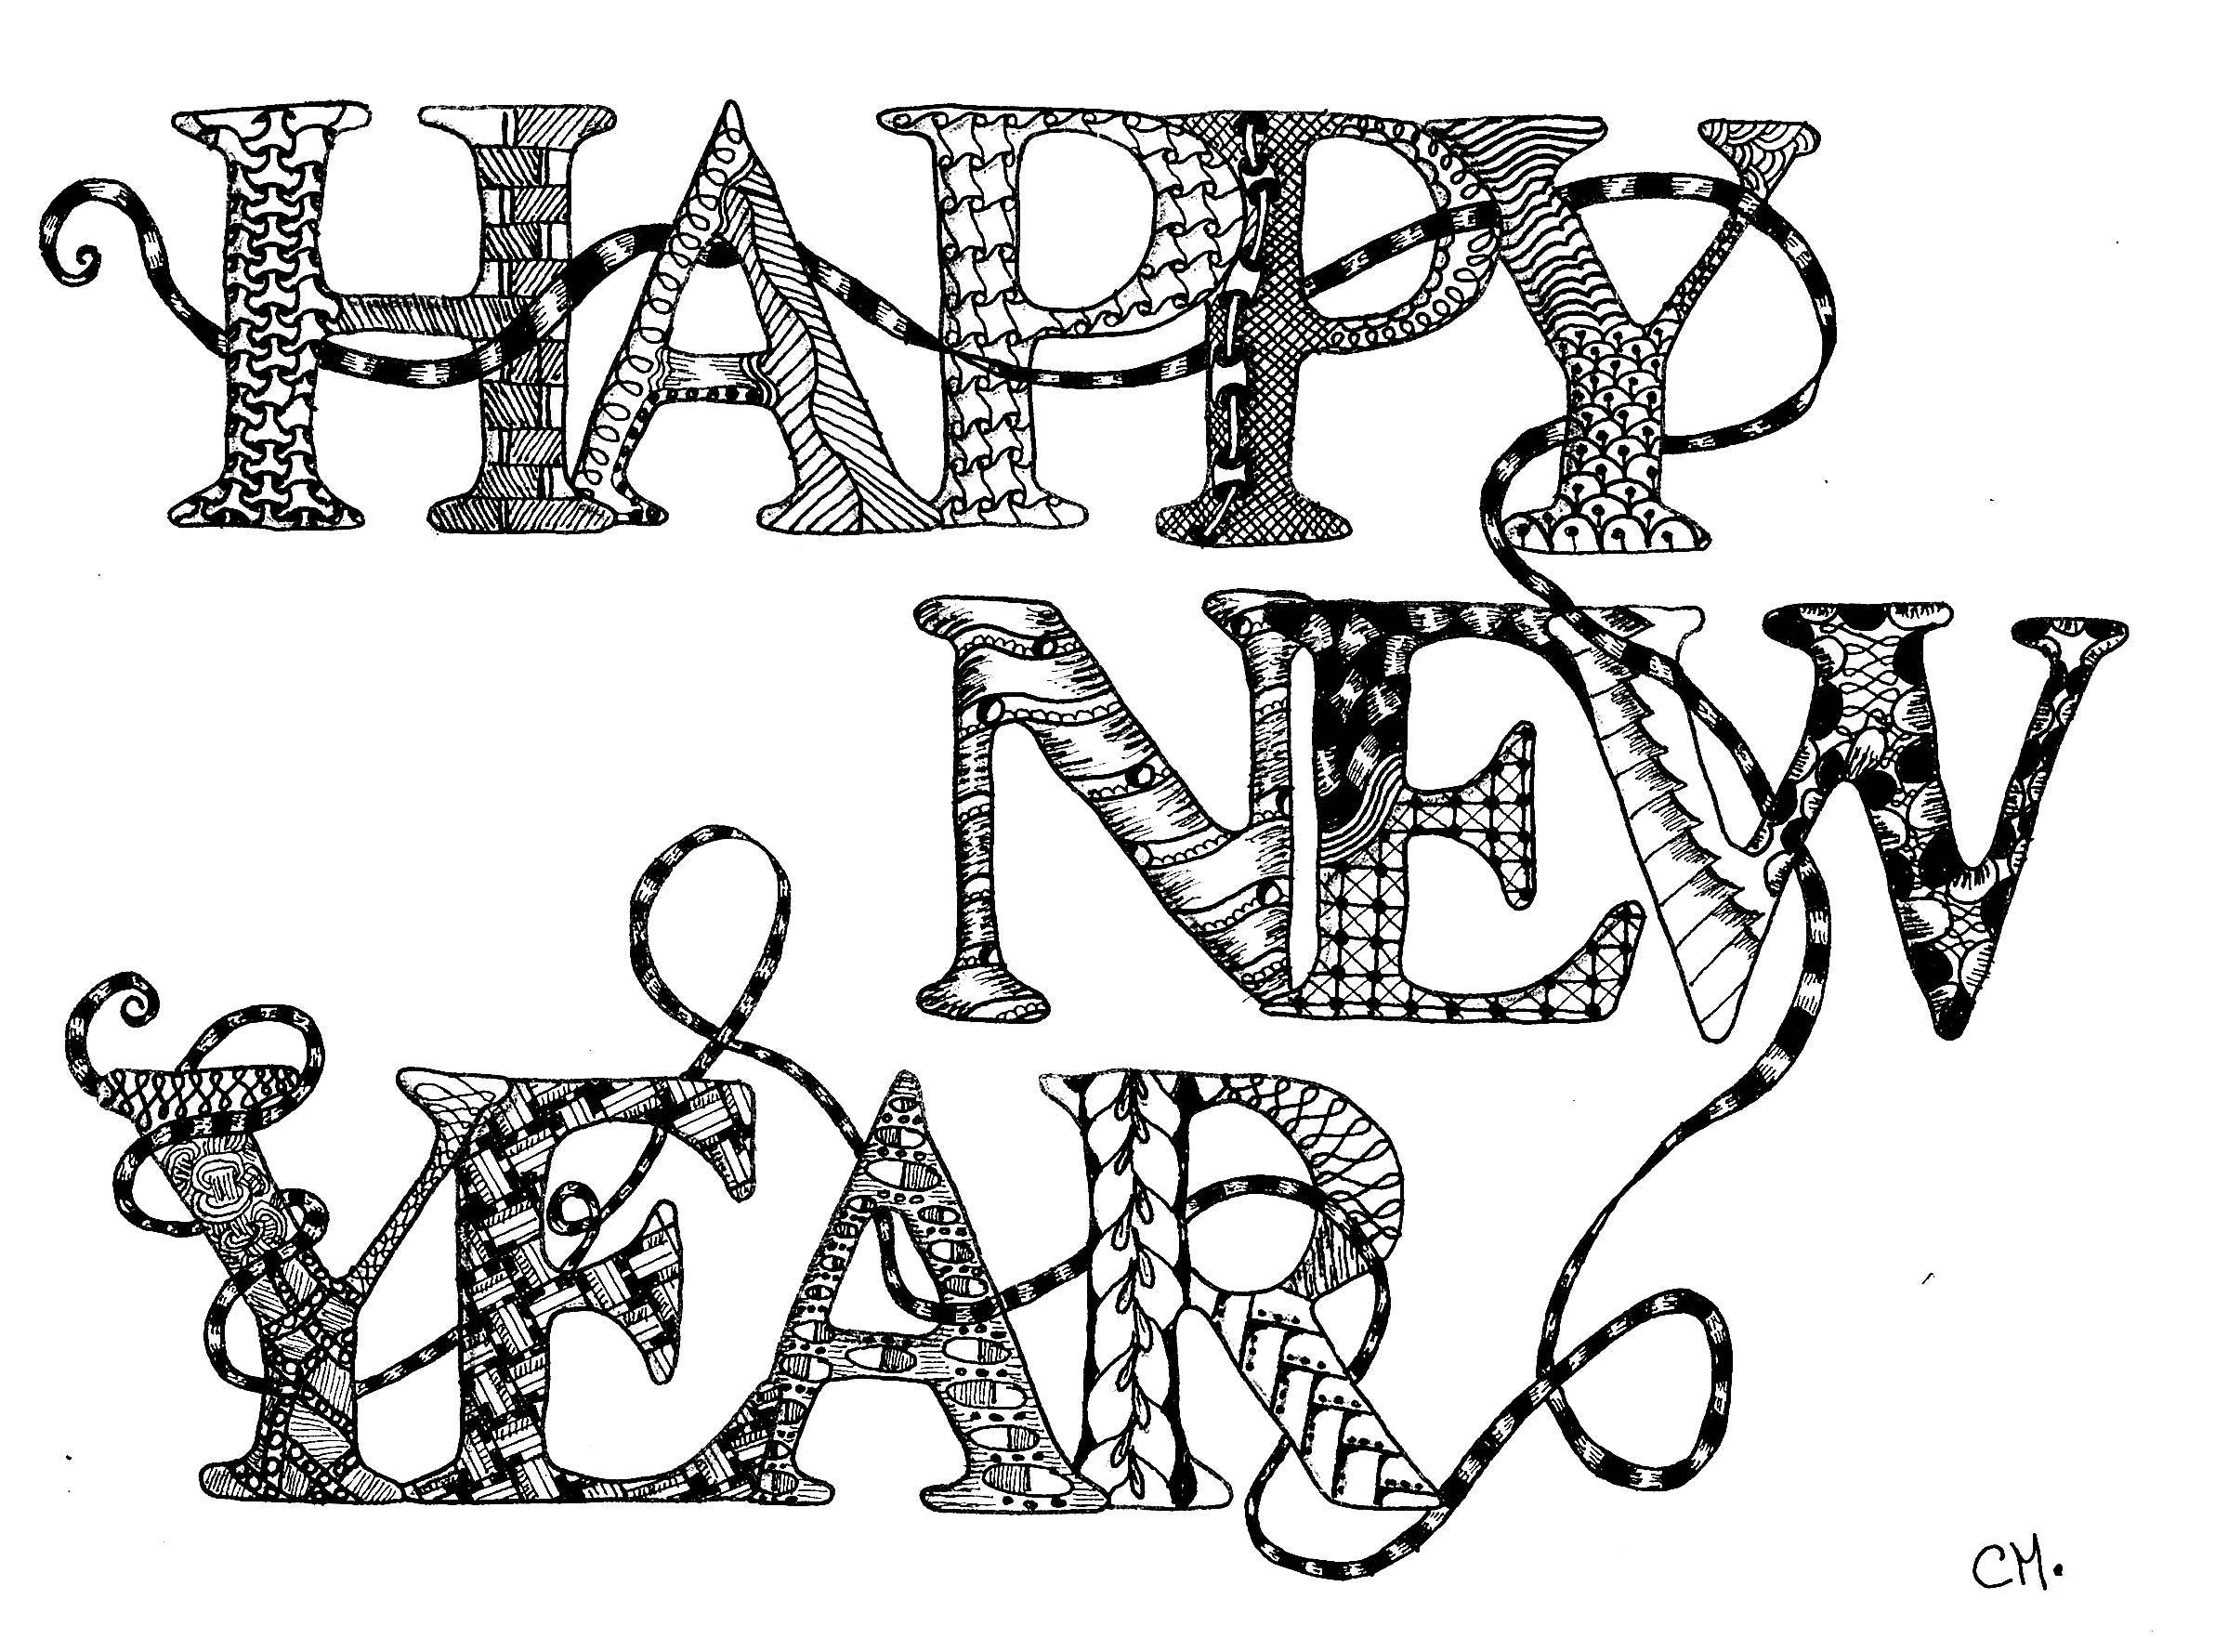 'Happy New Year', original coloring book Zentangle style, Artist : Cathy M